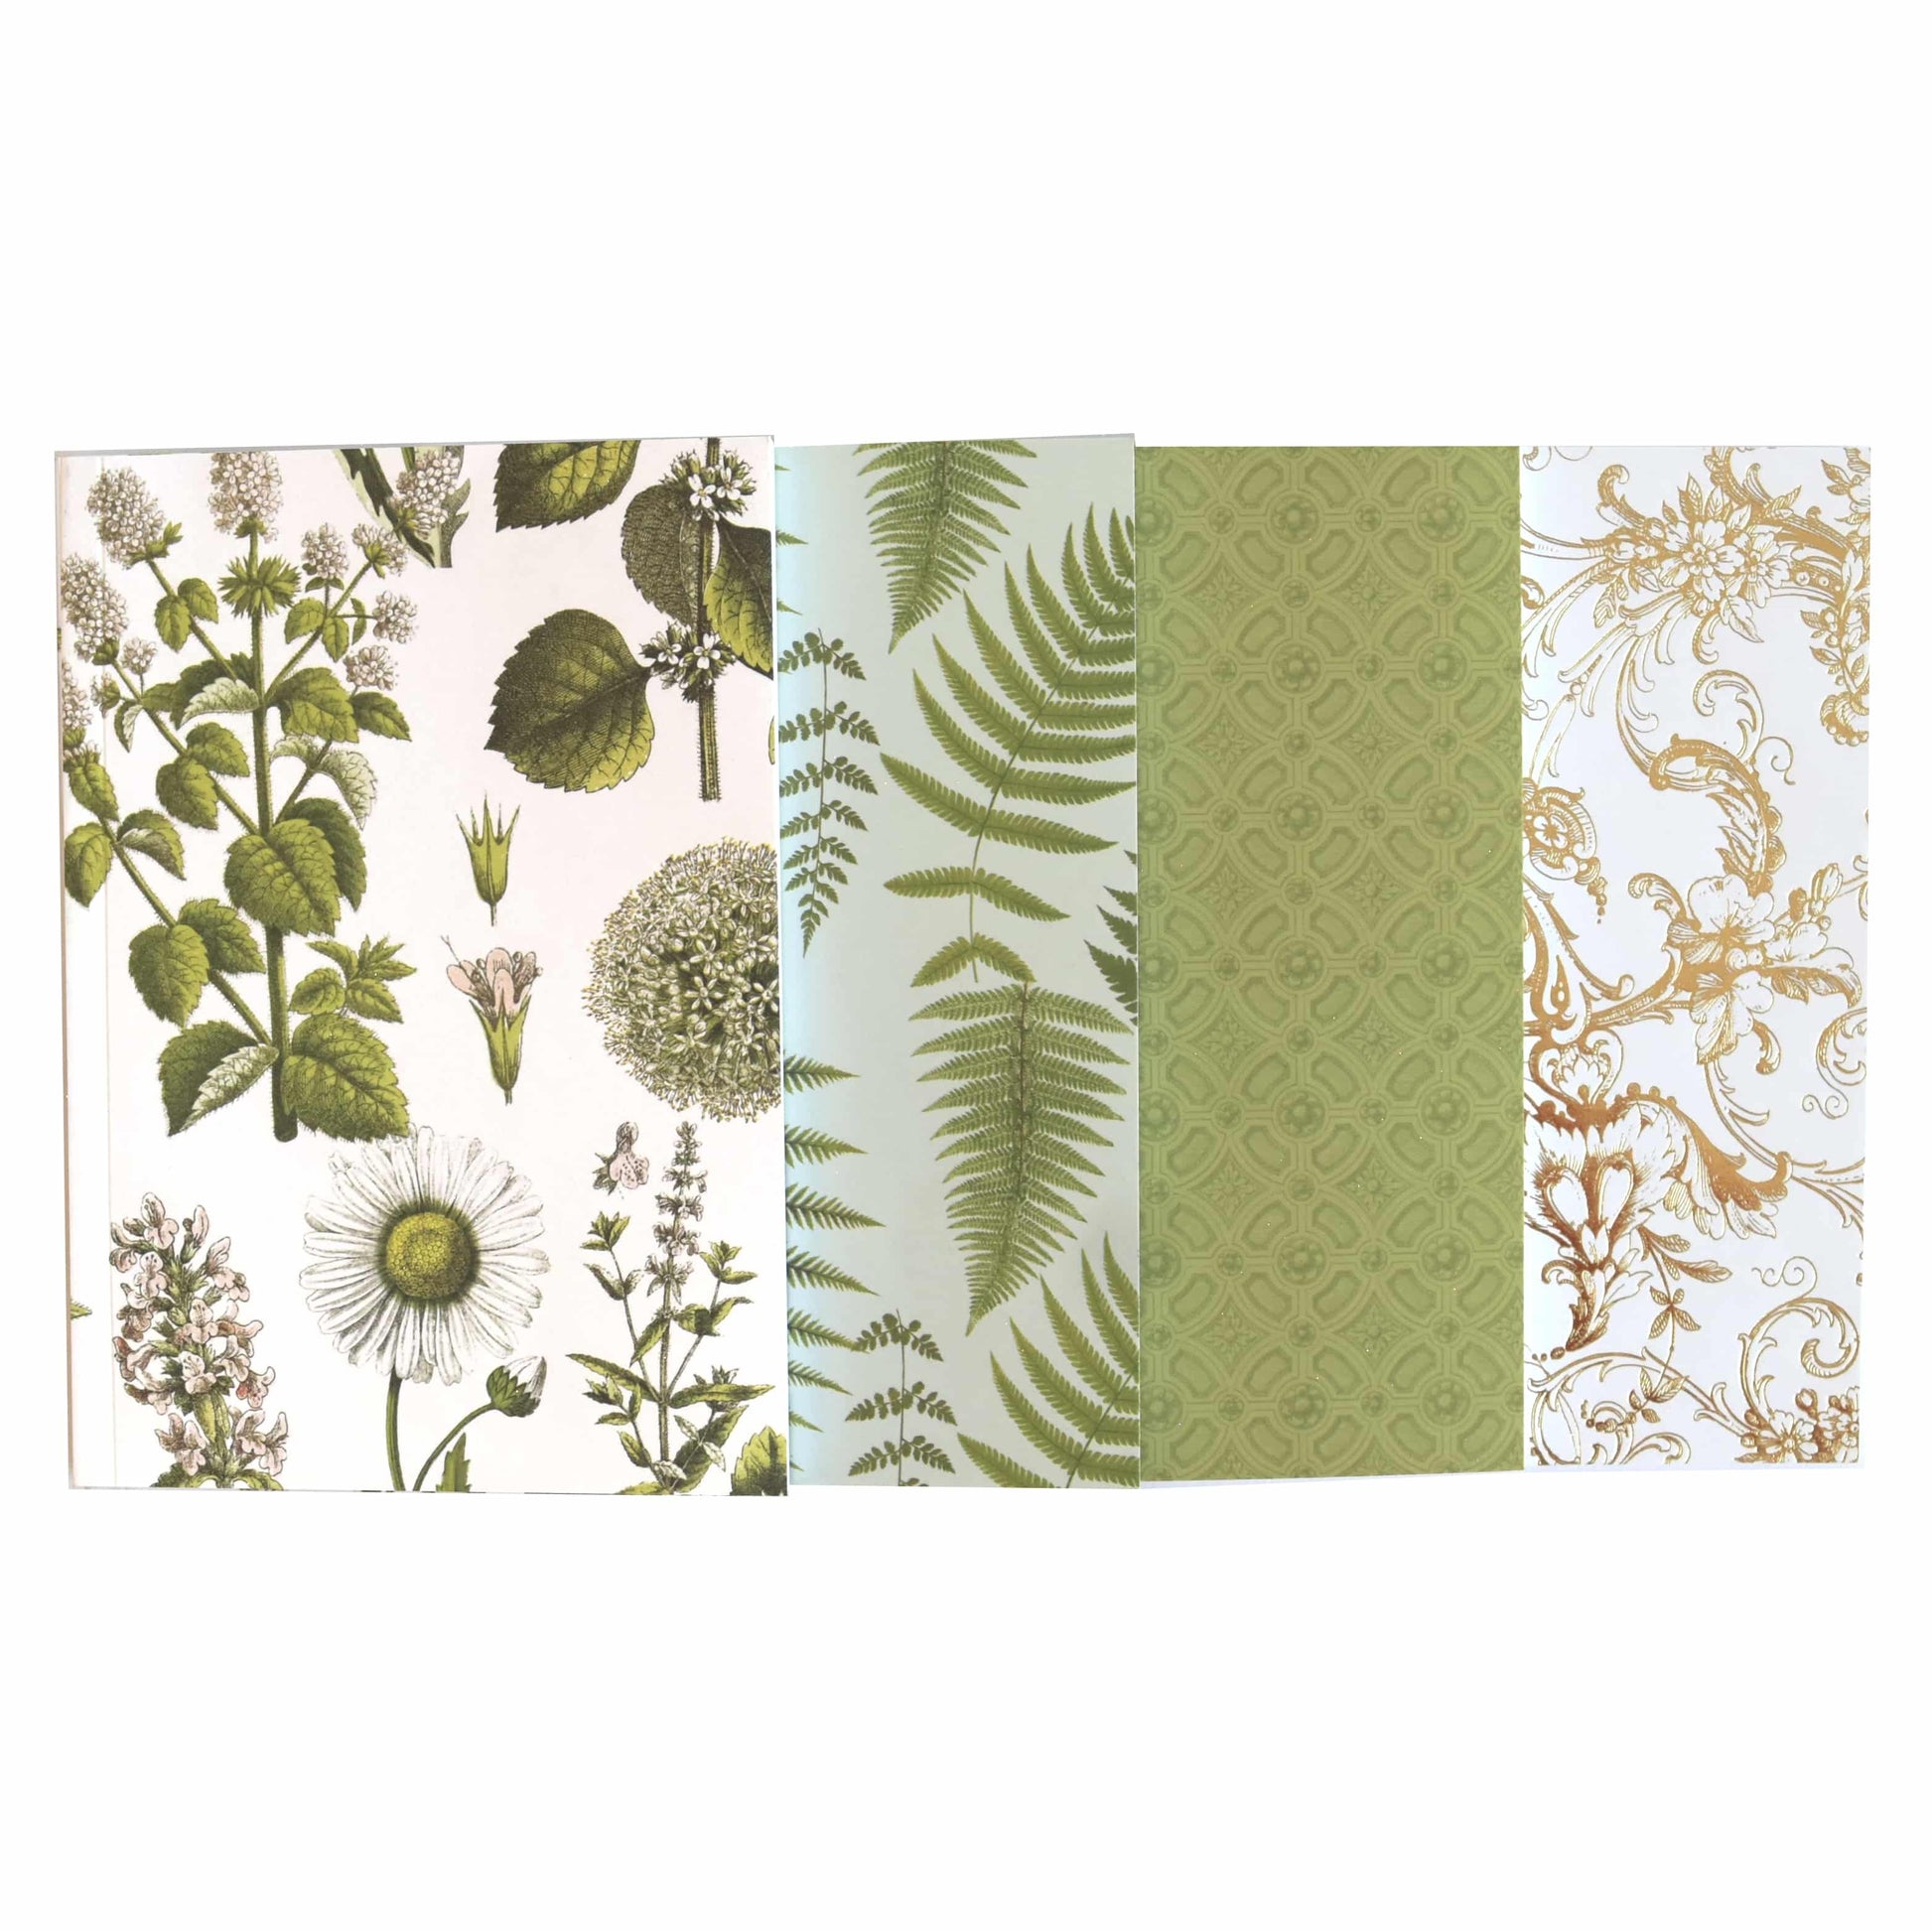 four different types of wallpaper with different designs.